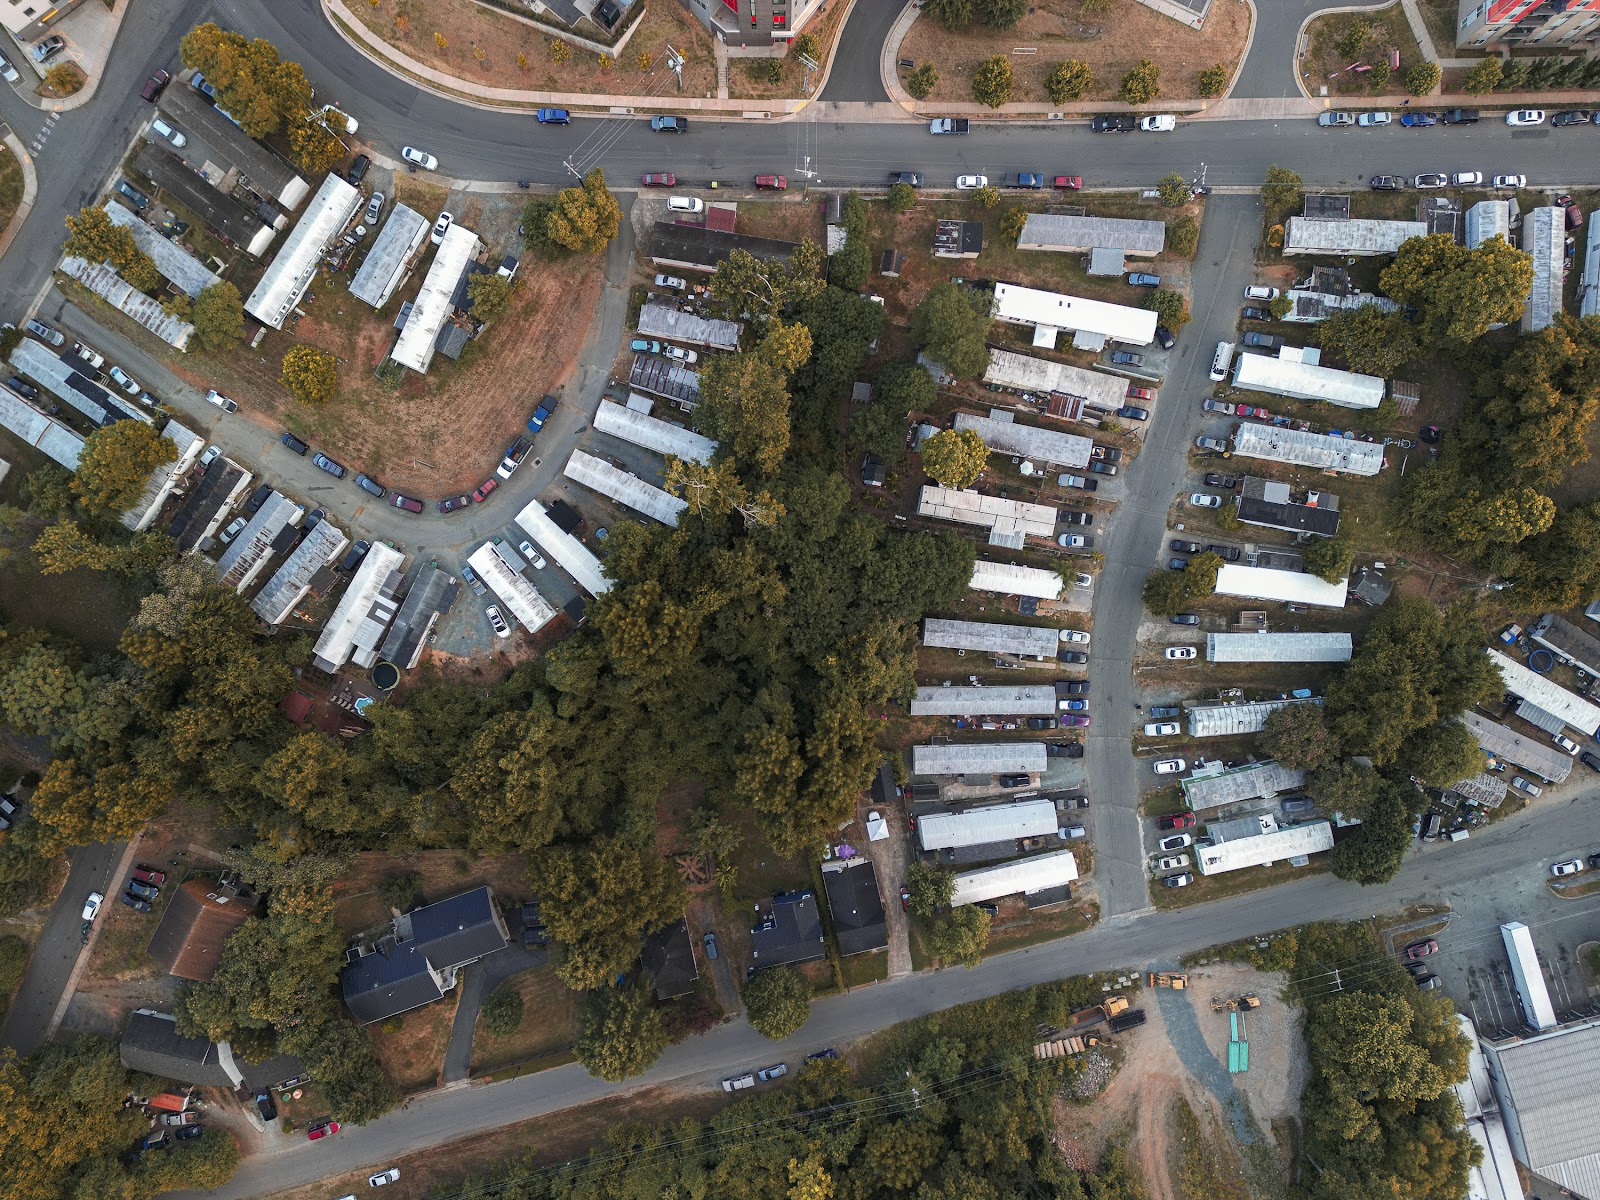 An aerial view of the mobile home park. Long trailer homes are lined up side by side along the curved roads.